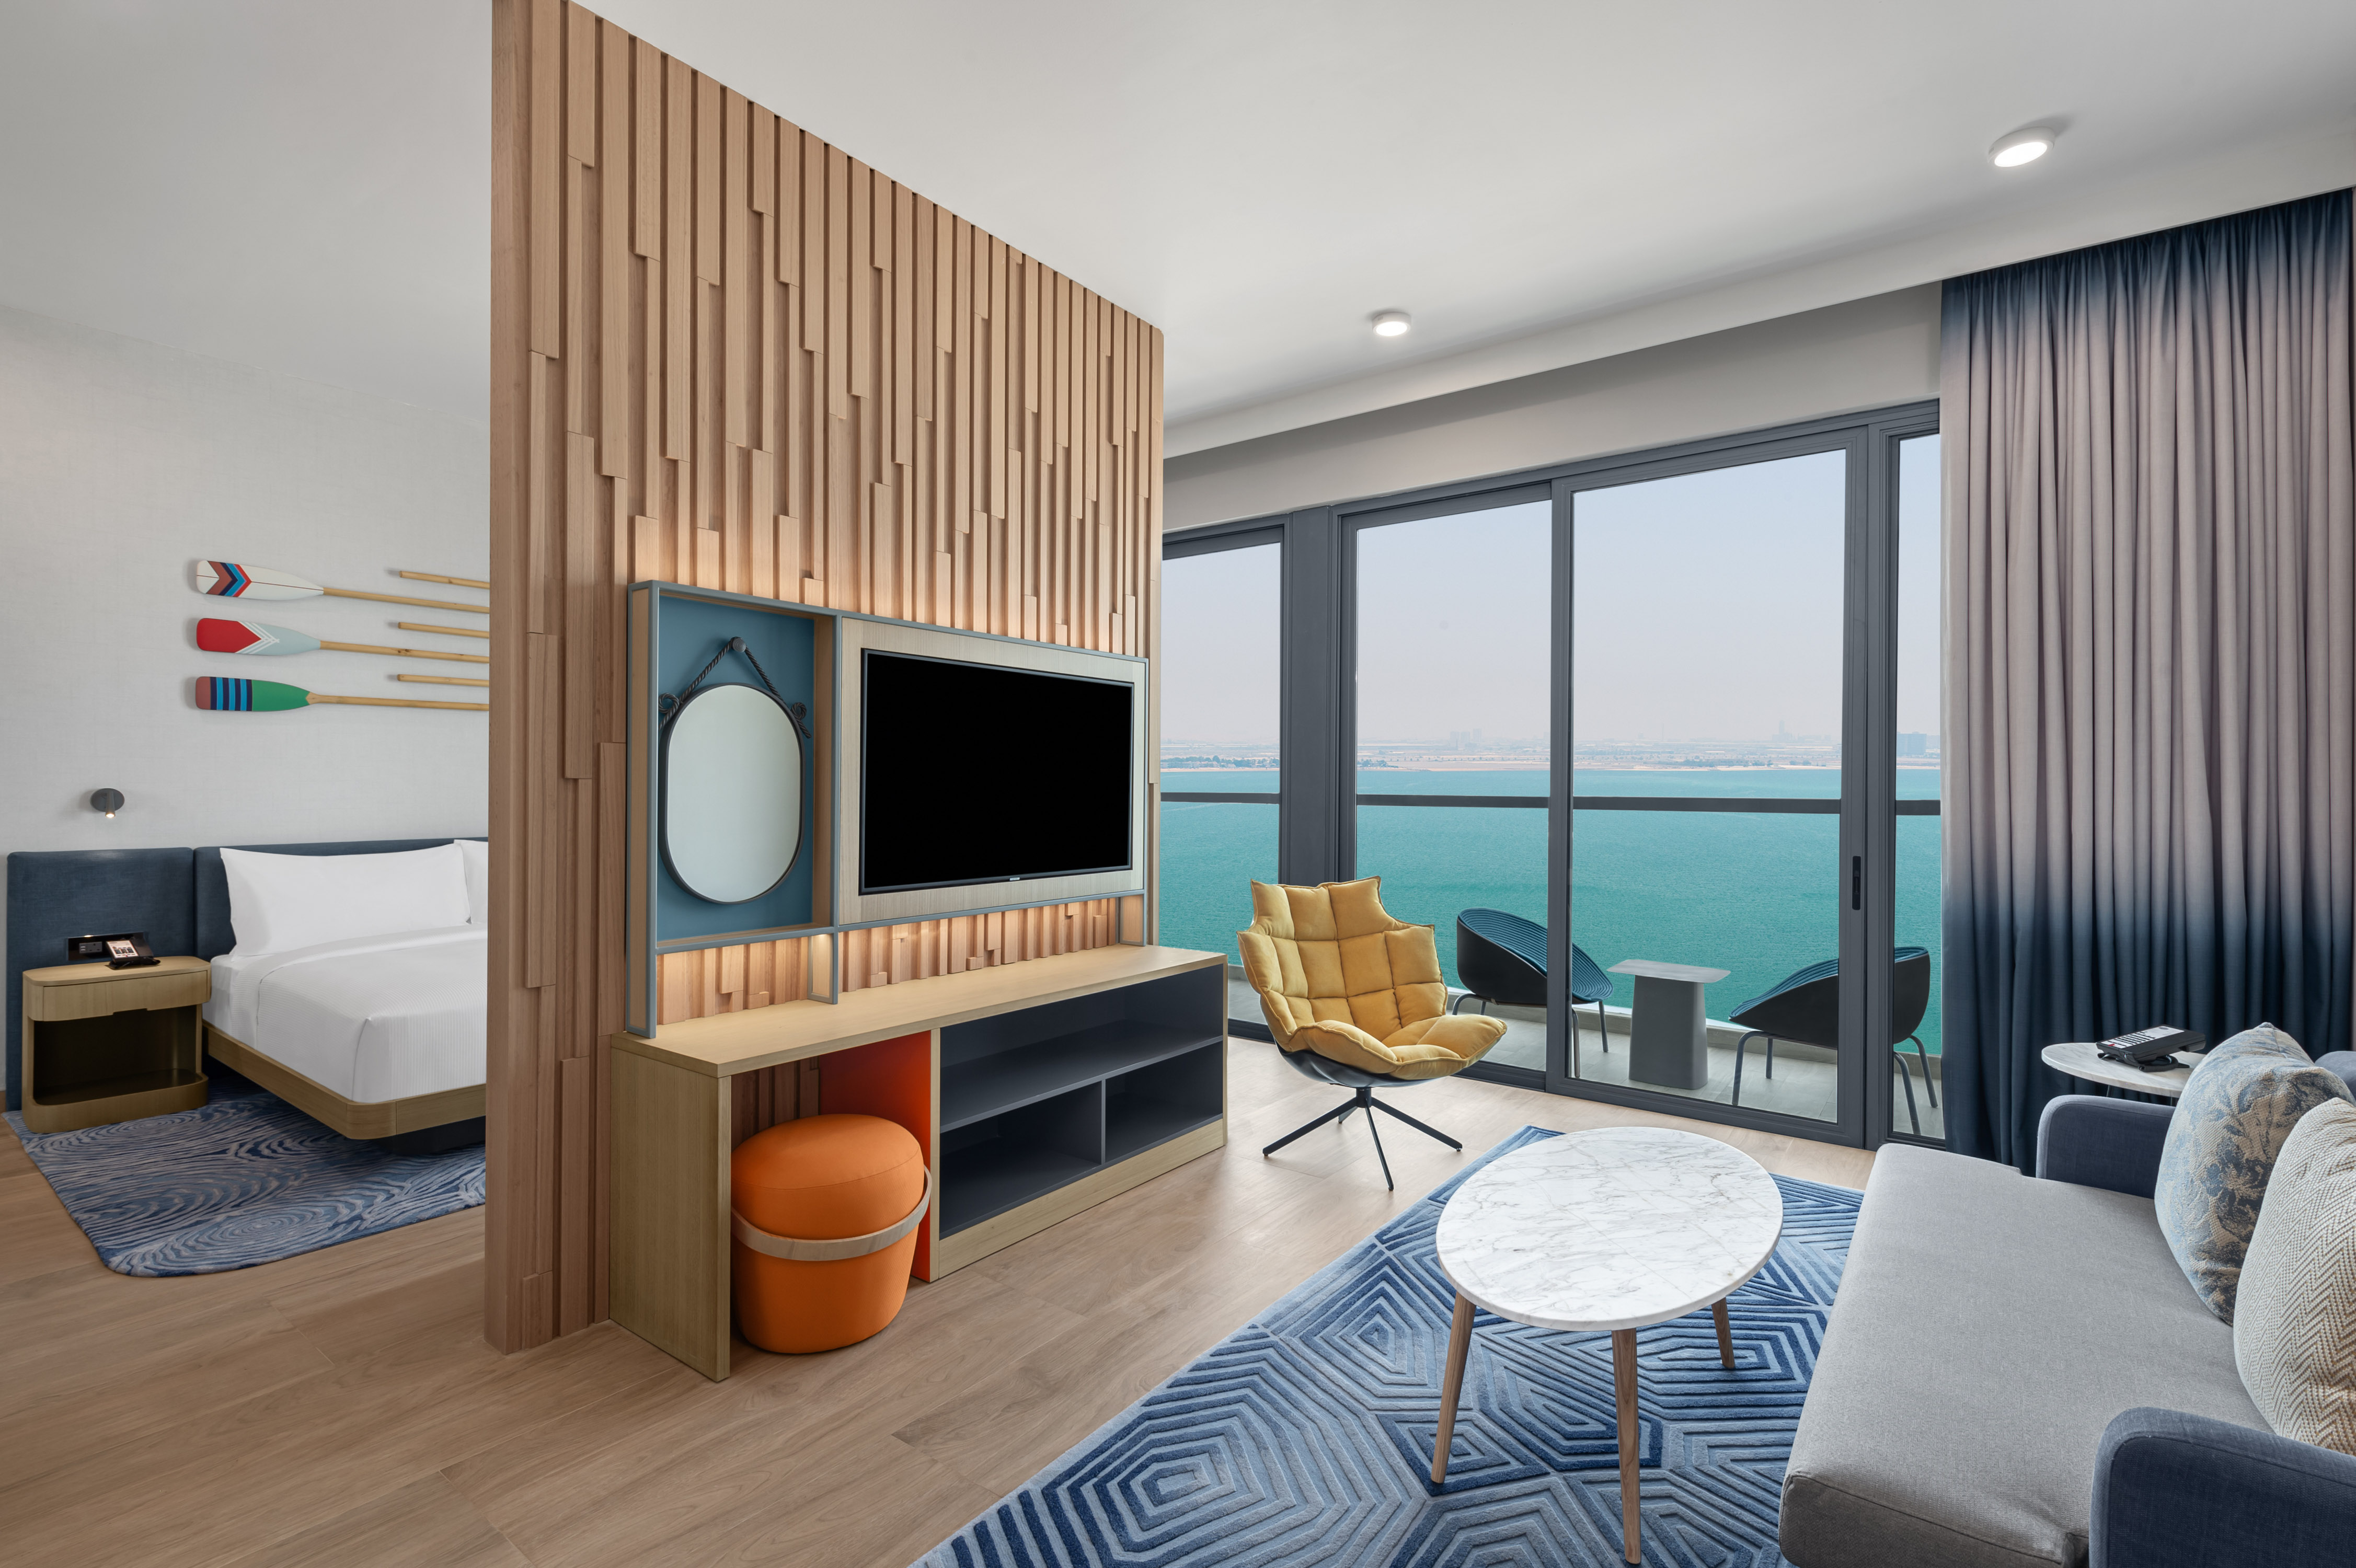 Guest Room Living Area with Sea View and Partial View of Bedroom